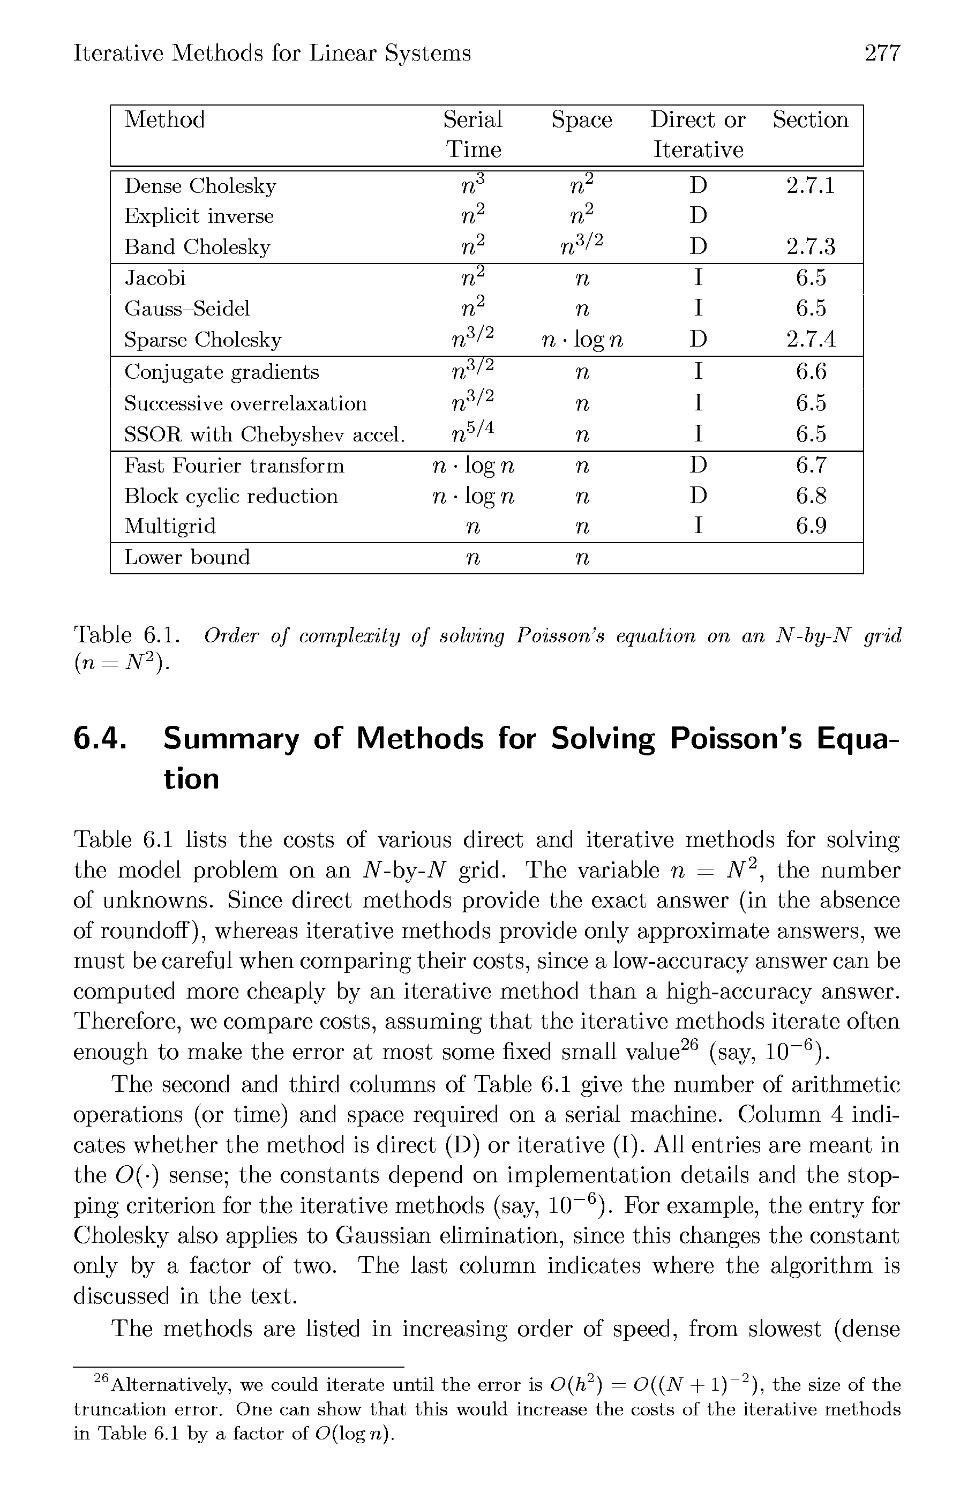 6.4 Summary of Methods for Solving Poisson's Equation